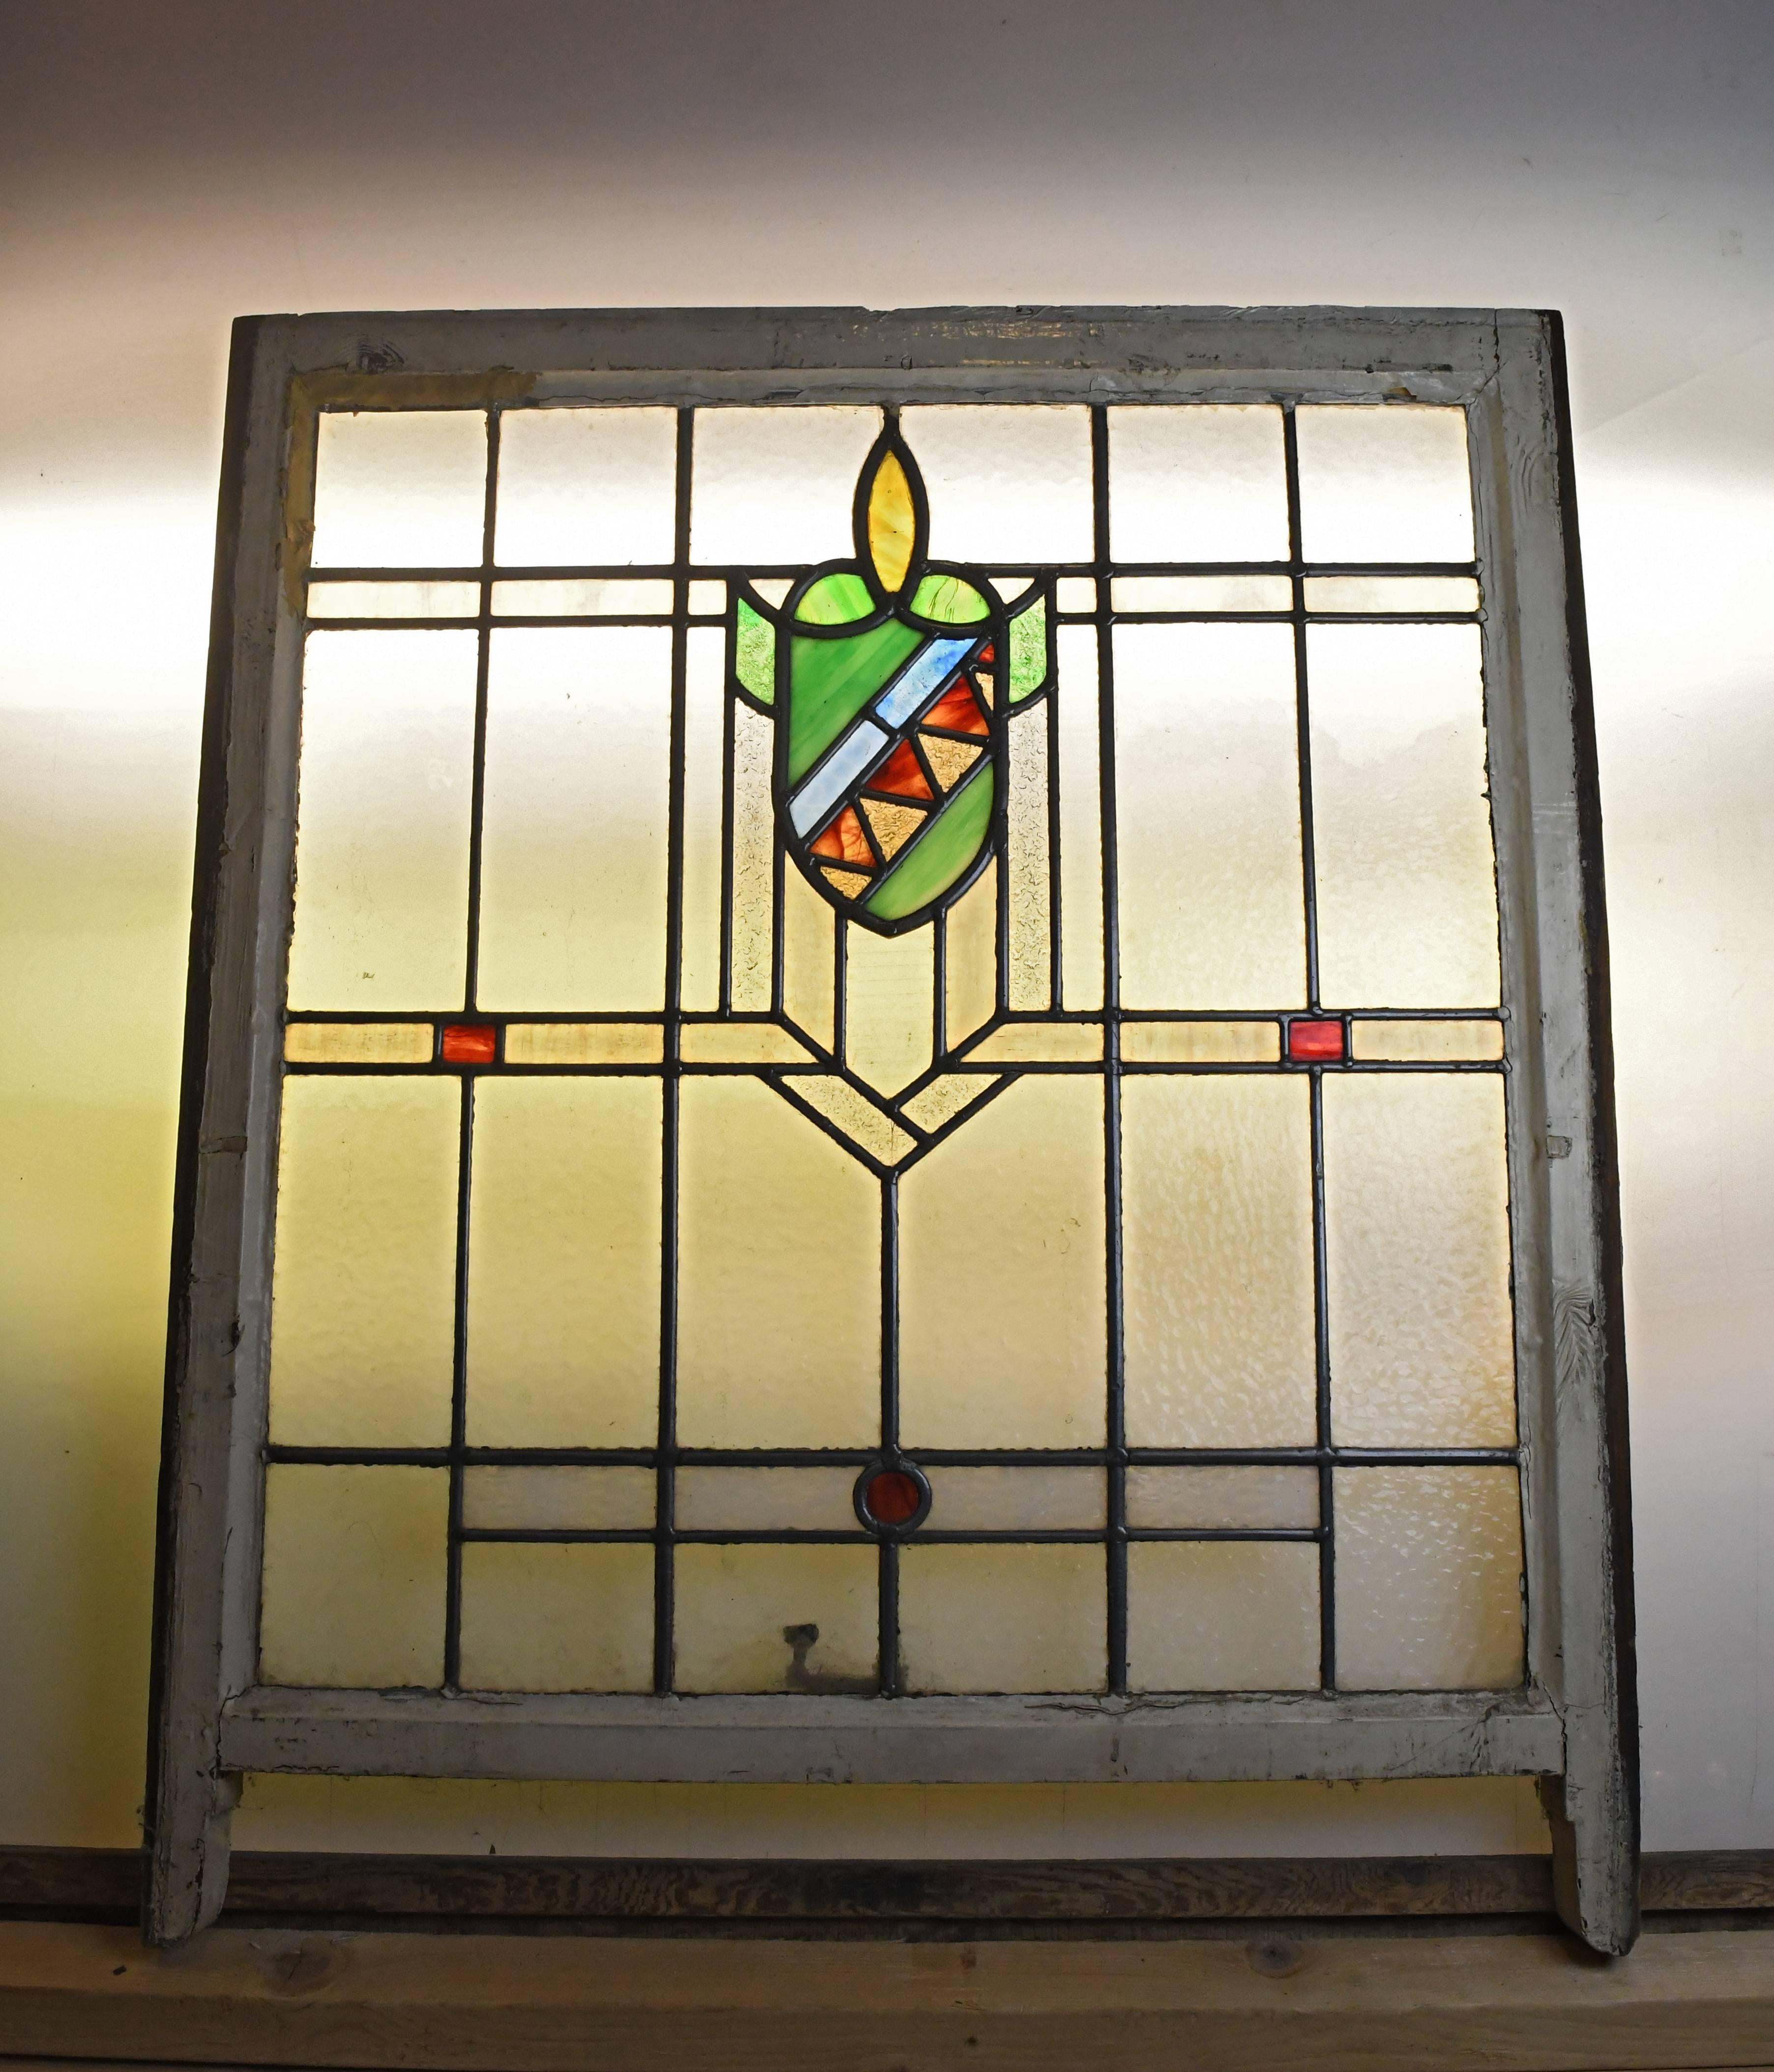 This wonderful stained glass window has various textured panels of glass throughout, small red glass squares, a small red glass circle at the bottom, and a beautiful shield design serving as the main focal point of the whole window. The colors on